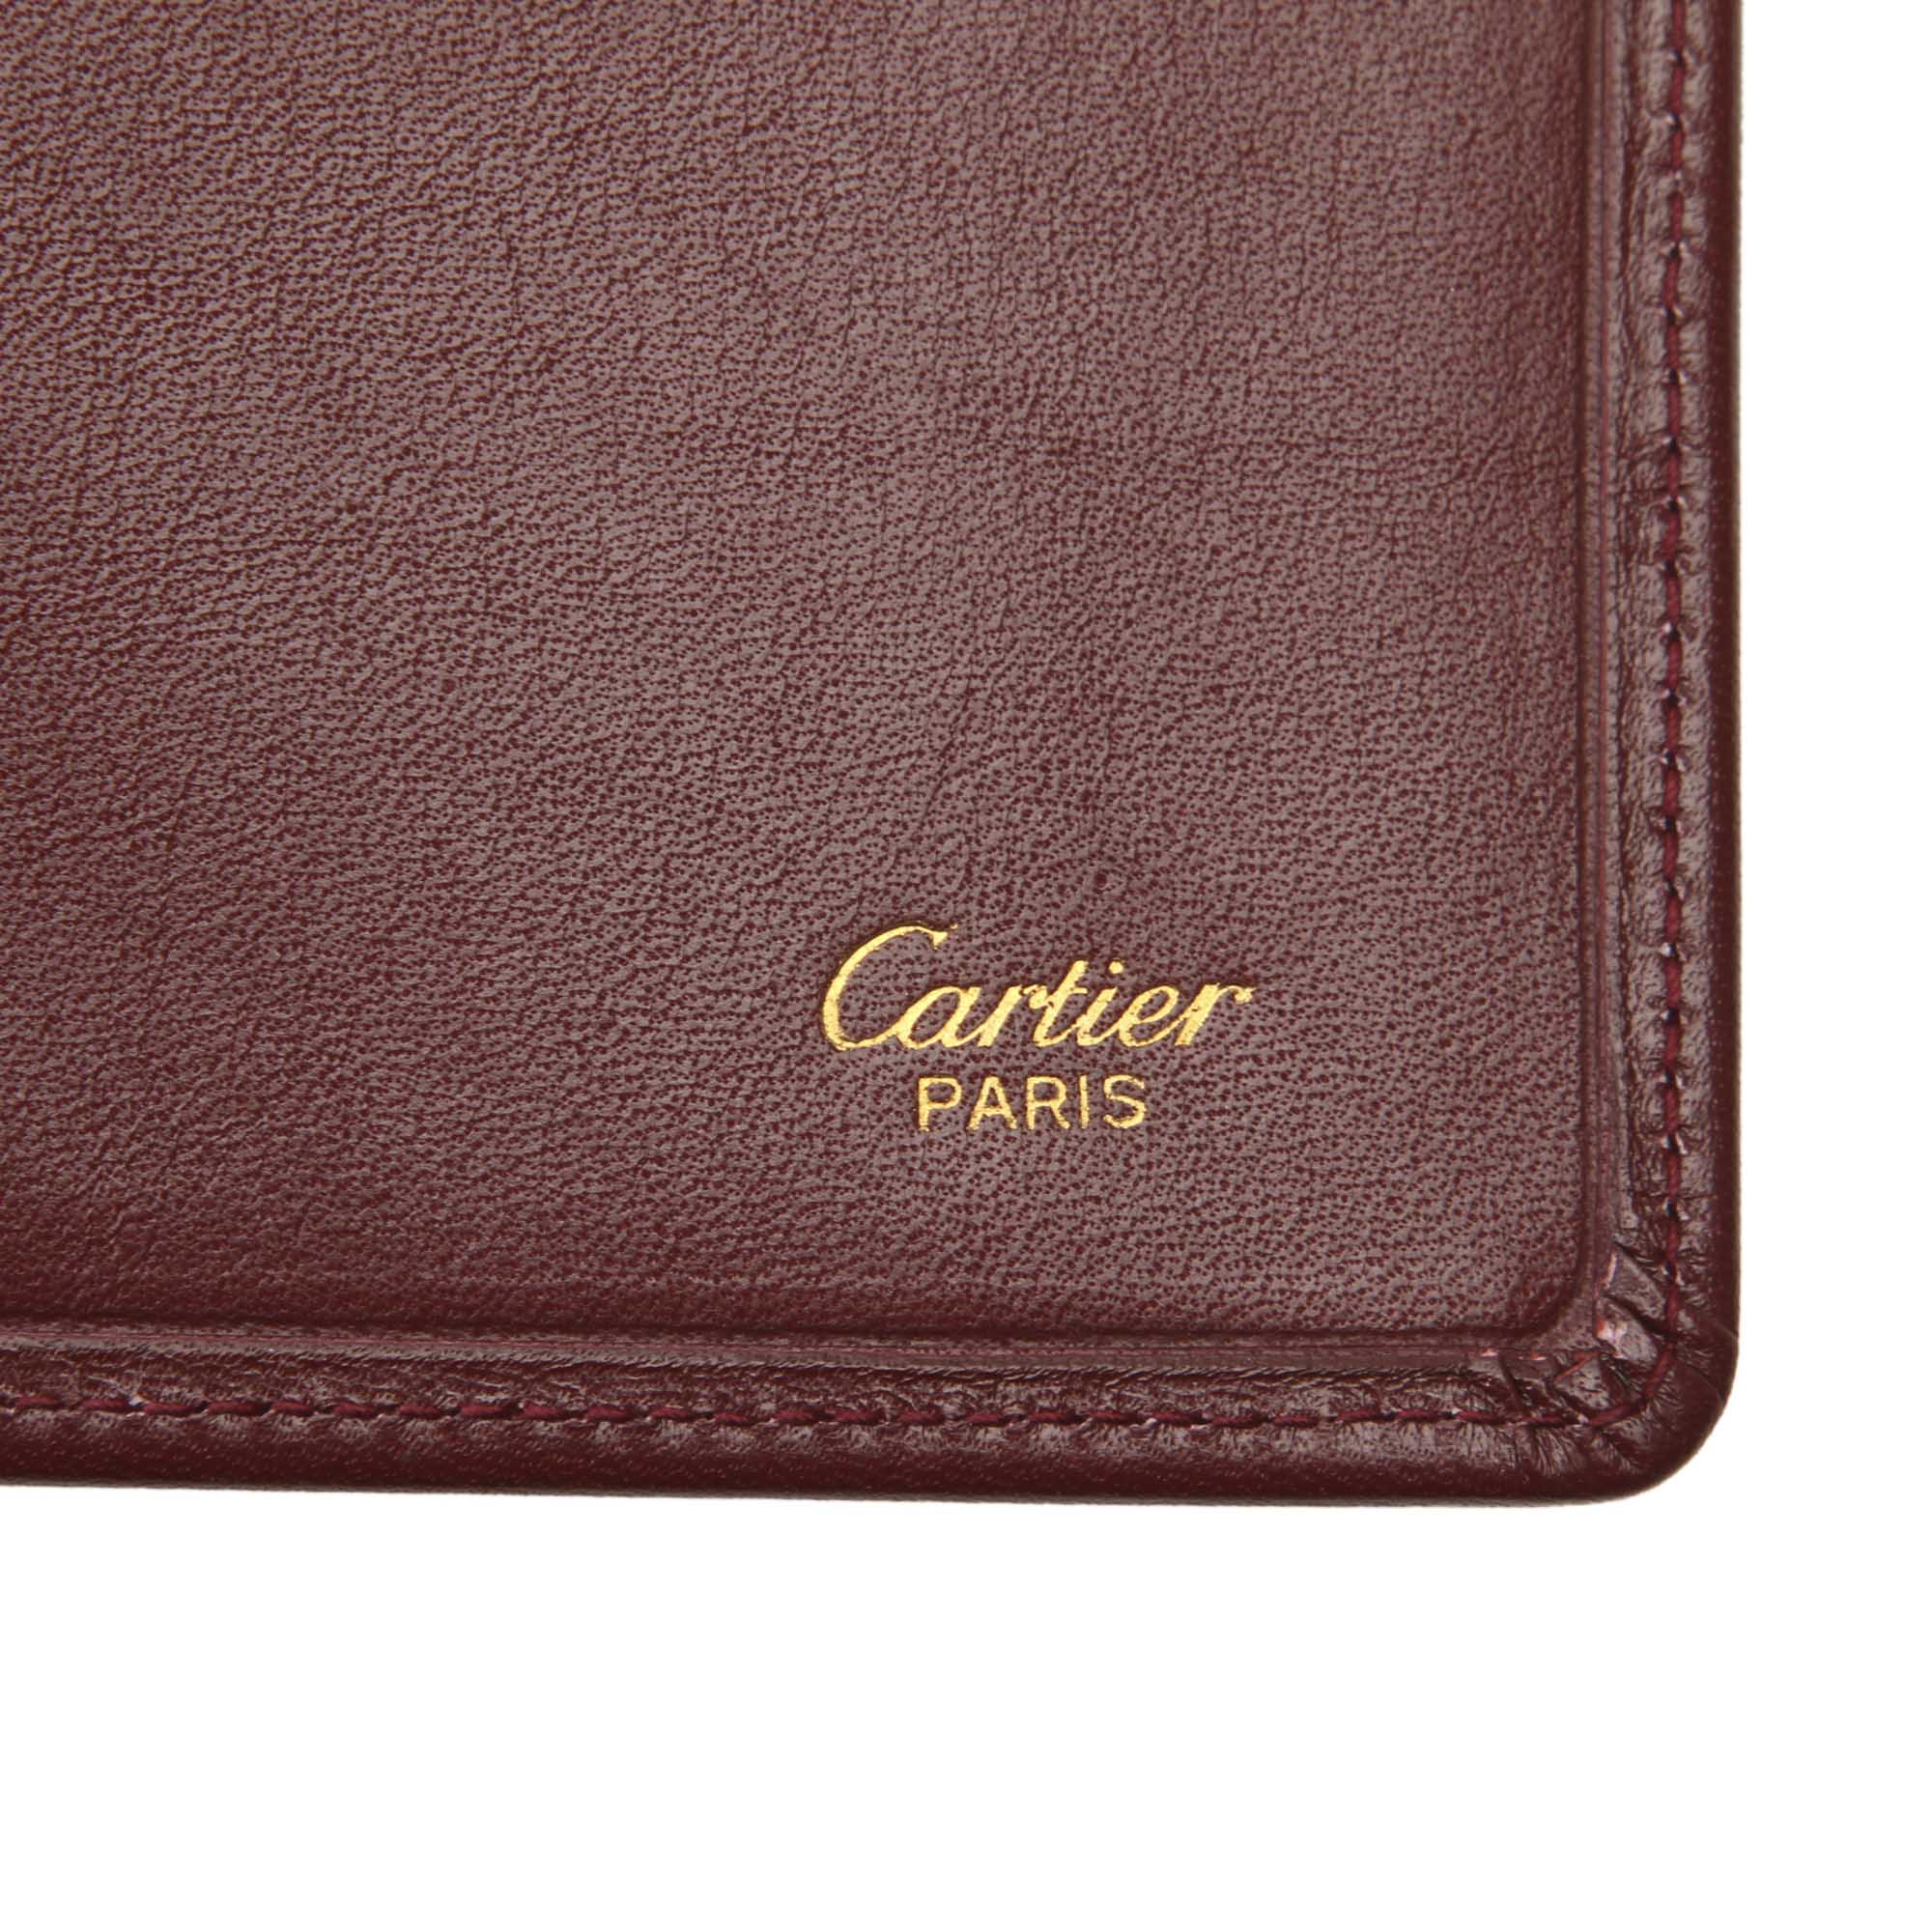 cartier red card application